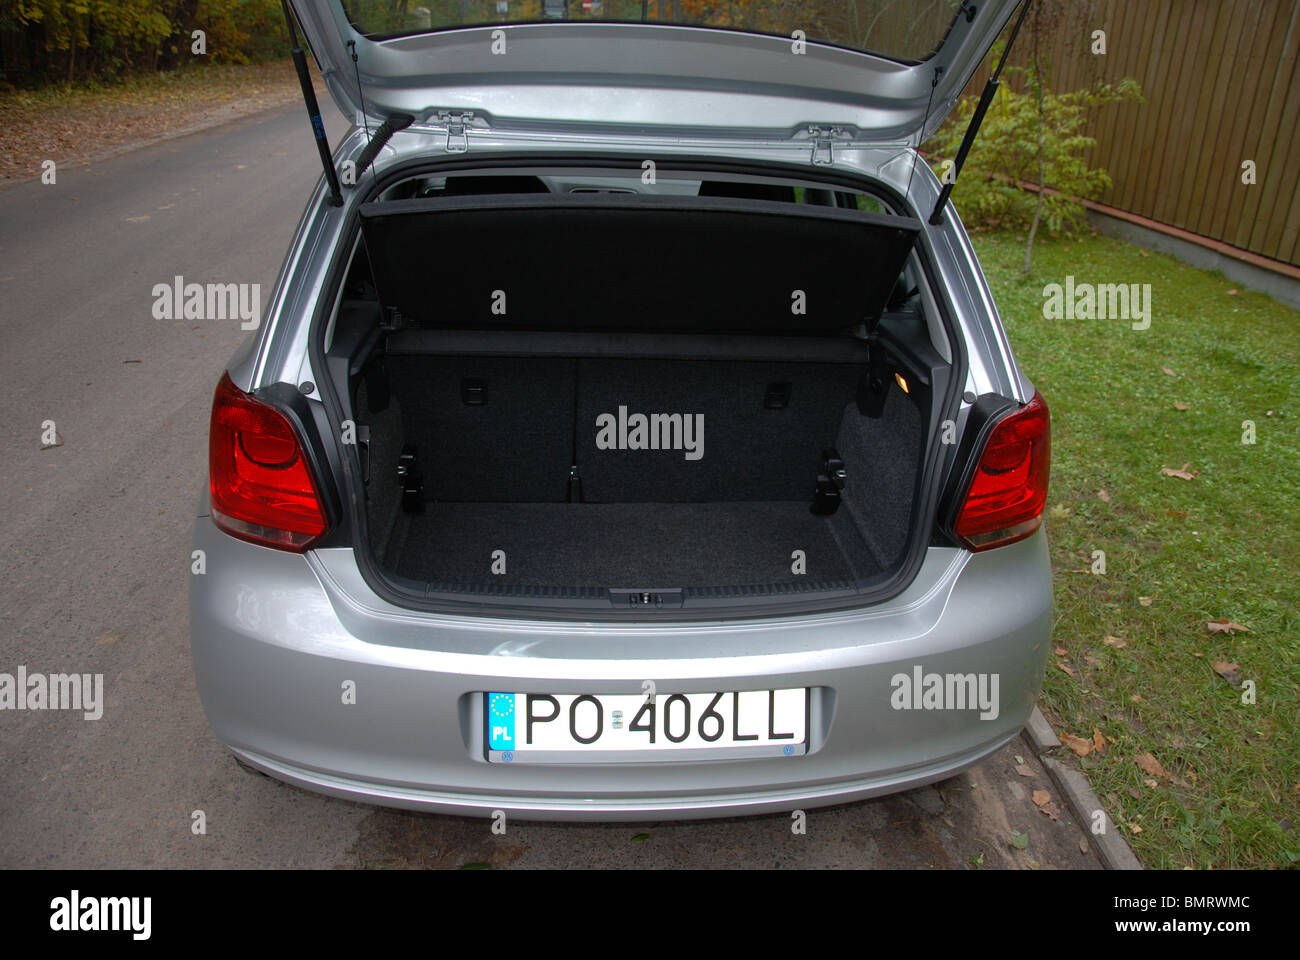 Volkswagen Polo 1.6 TDI - MY 2009 - silver - five doors (5D) - German subcompact city car - boot, trunk Stock Photo